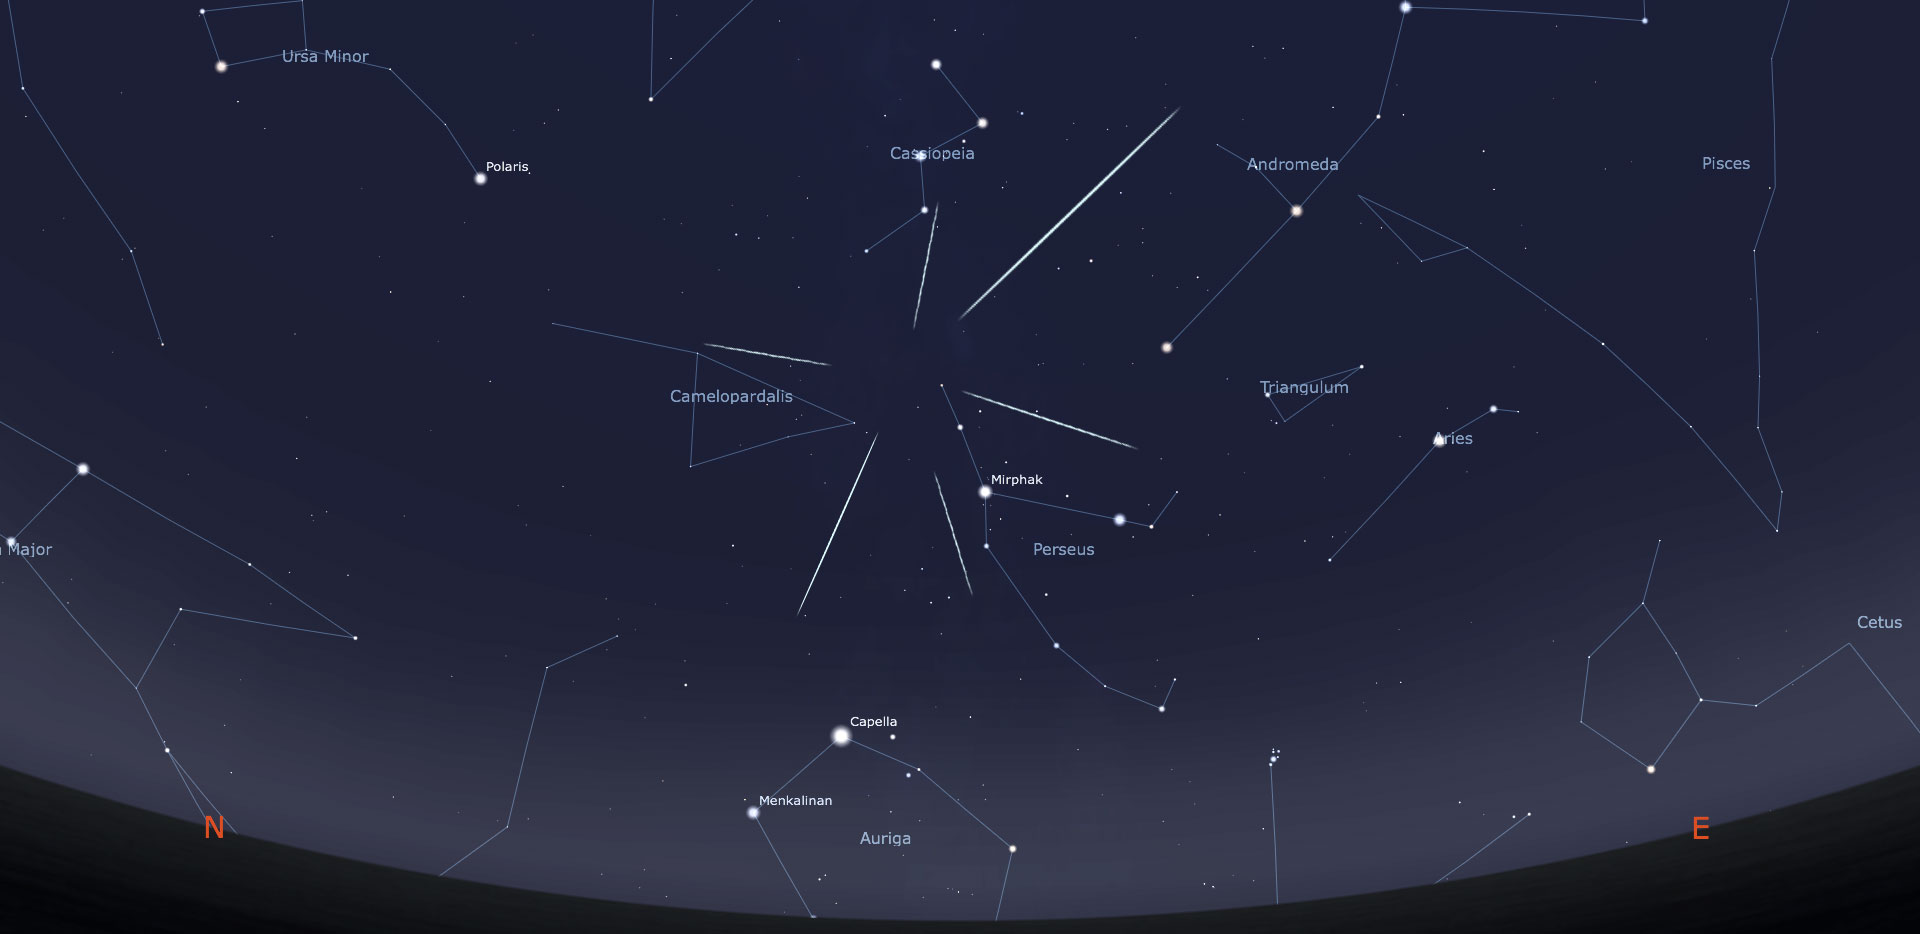 “Thunderstones” of August: the Perseid Meteor Shower